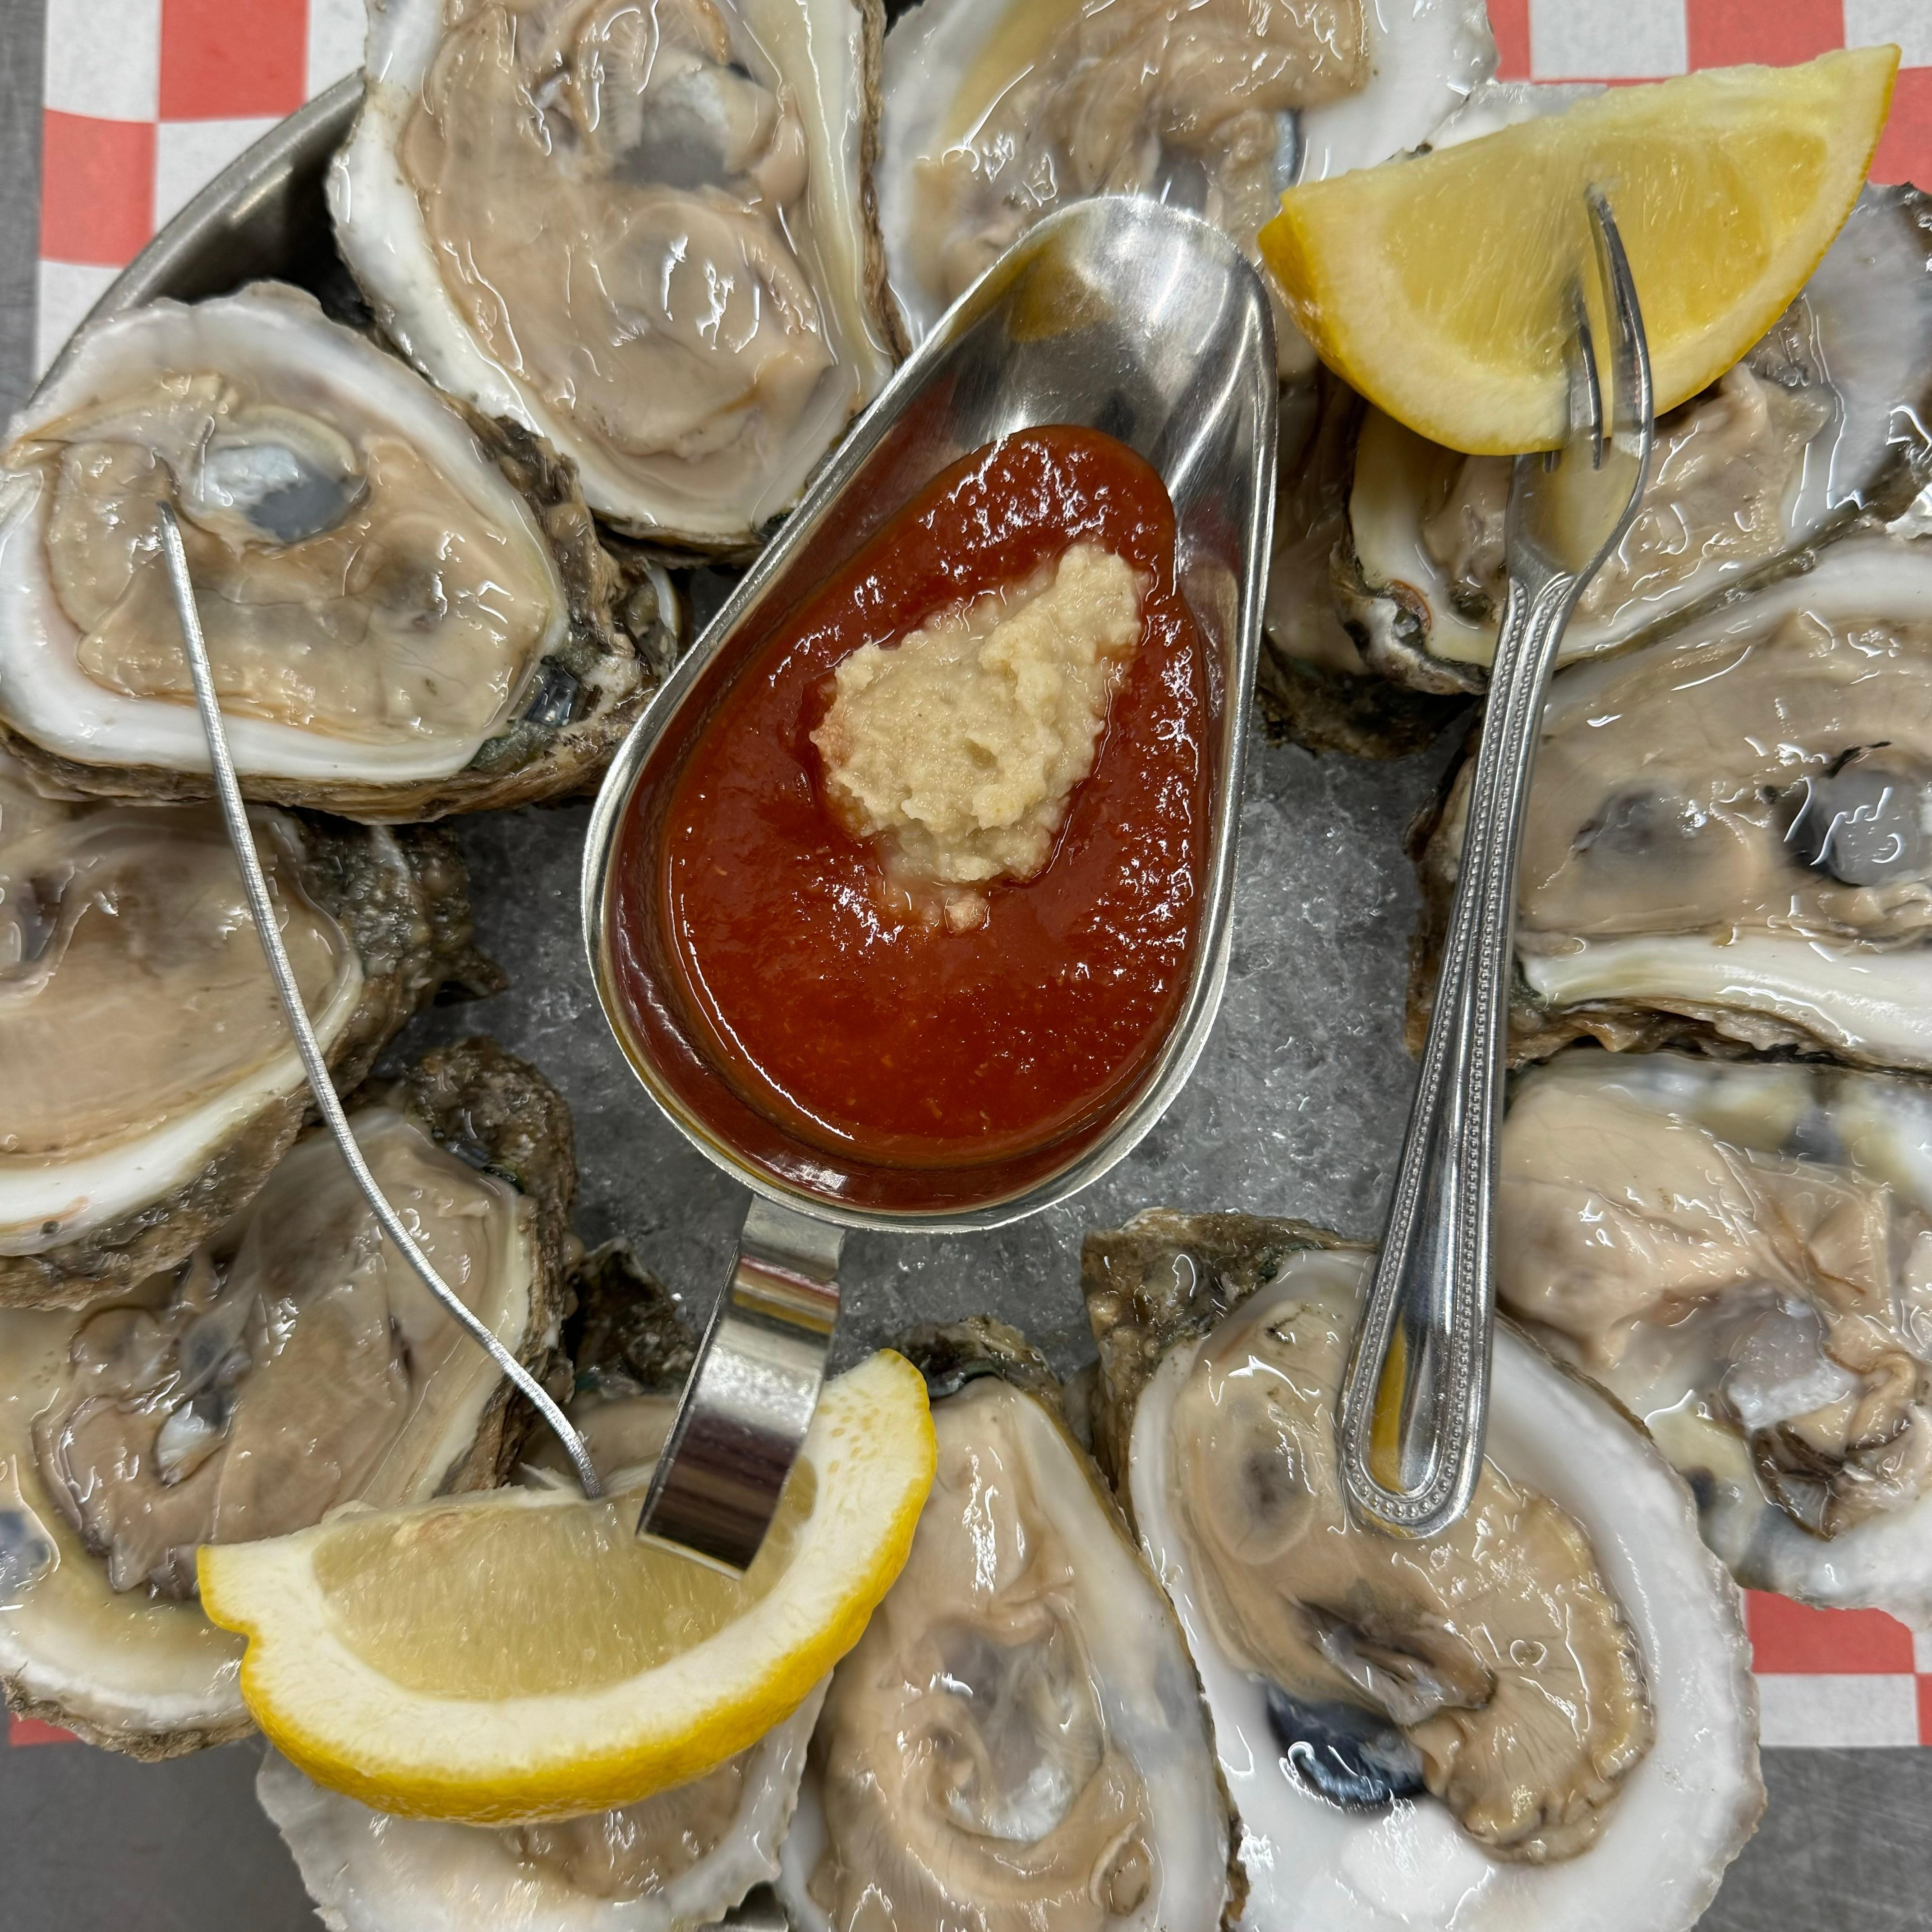 (6) Oyster On The Half Shell